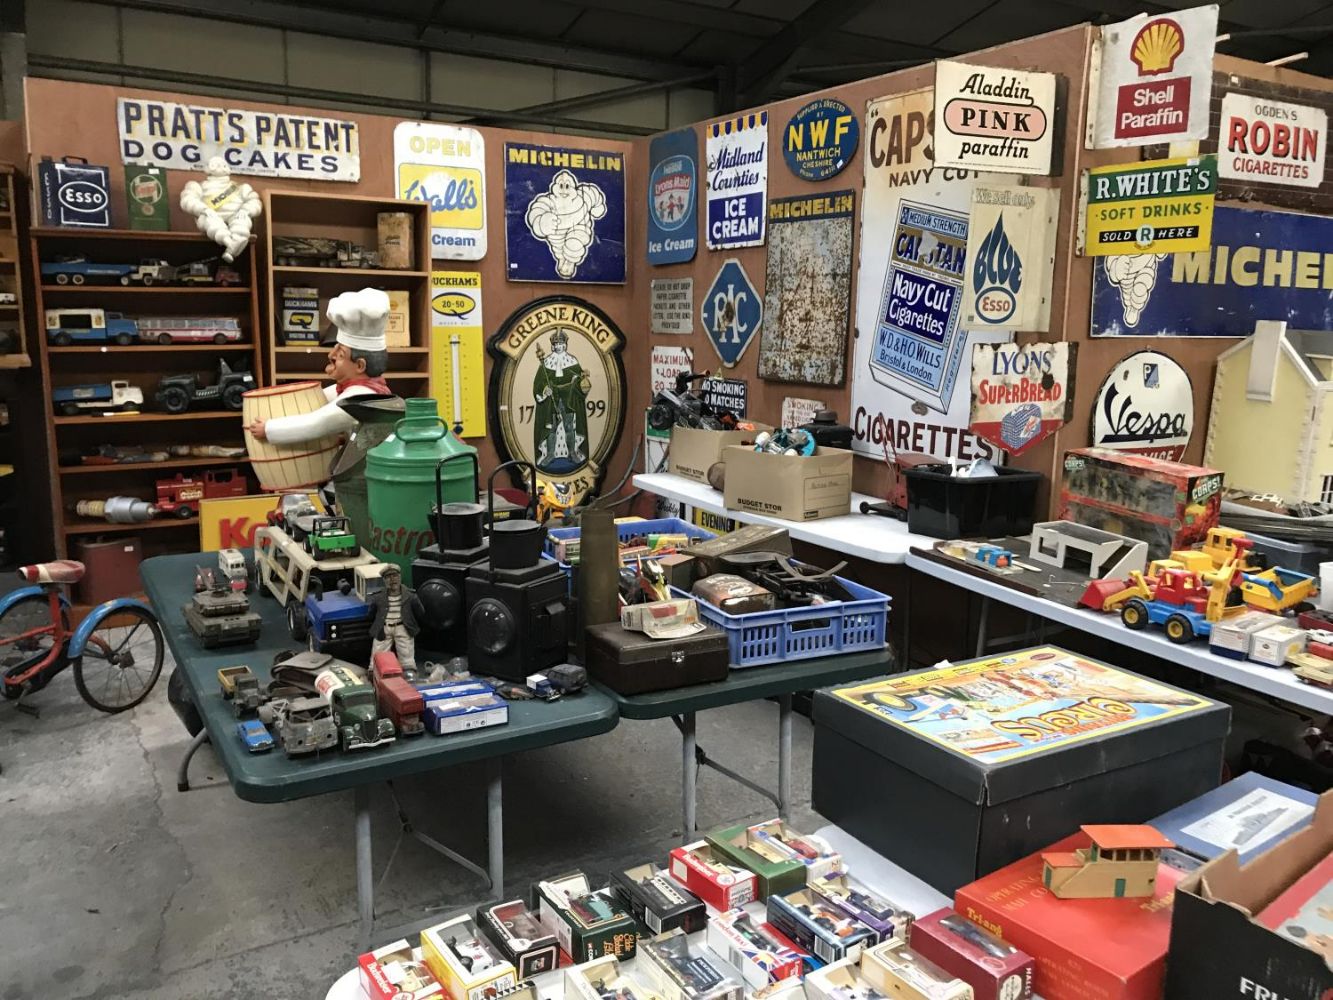 Two Day Auction Of Collectables, Antiques, Furniture, Vintage Items - with a special section for Militaria